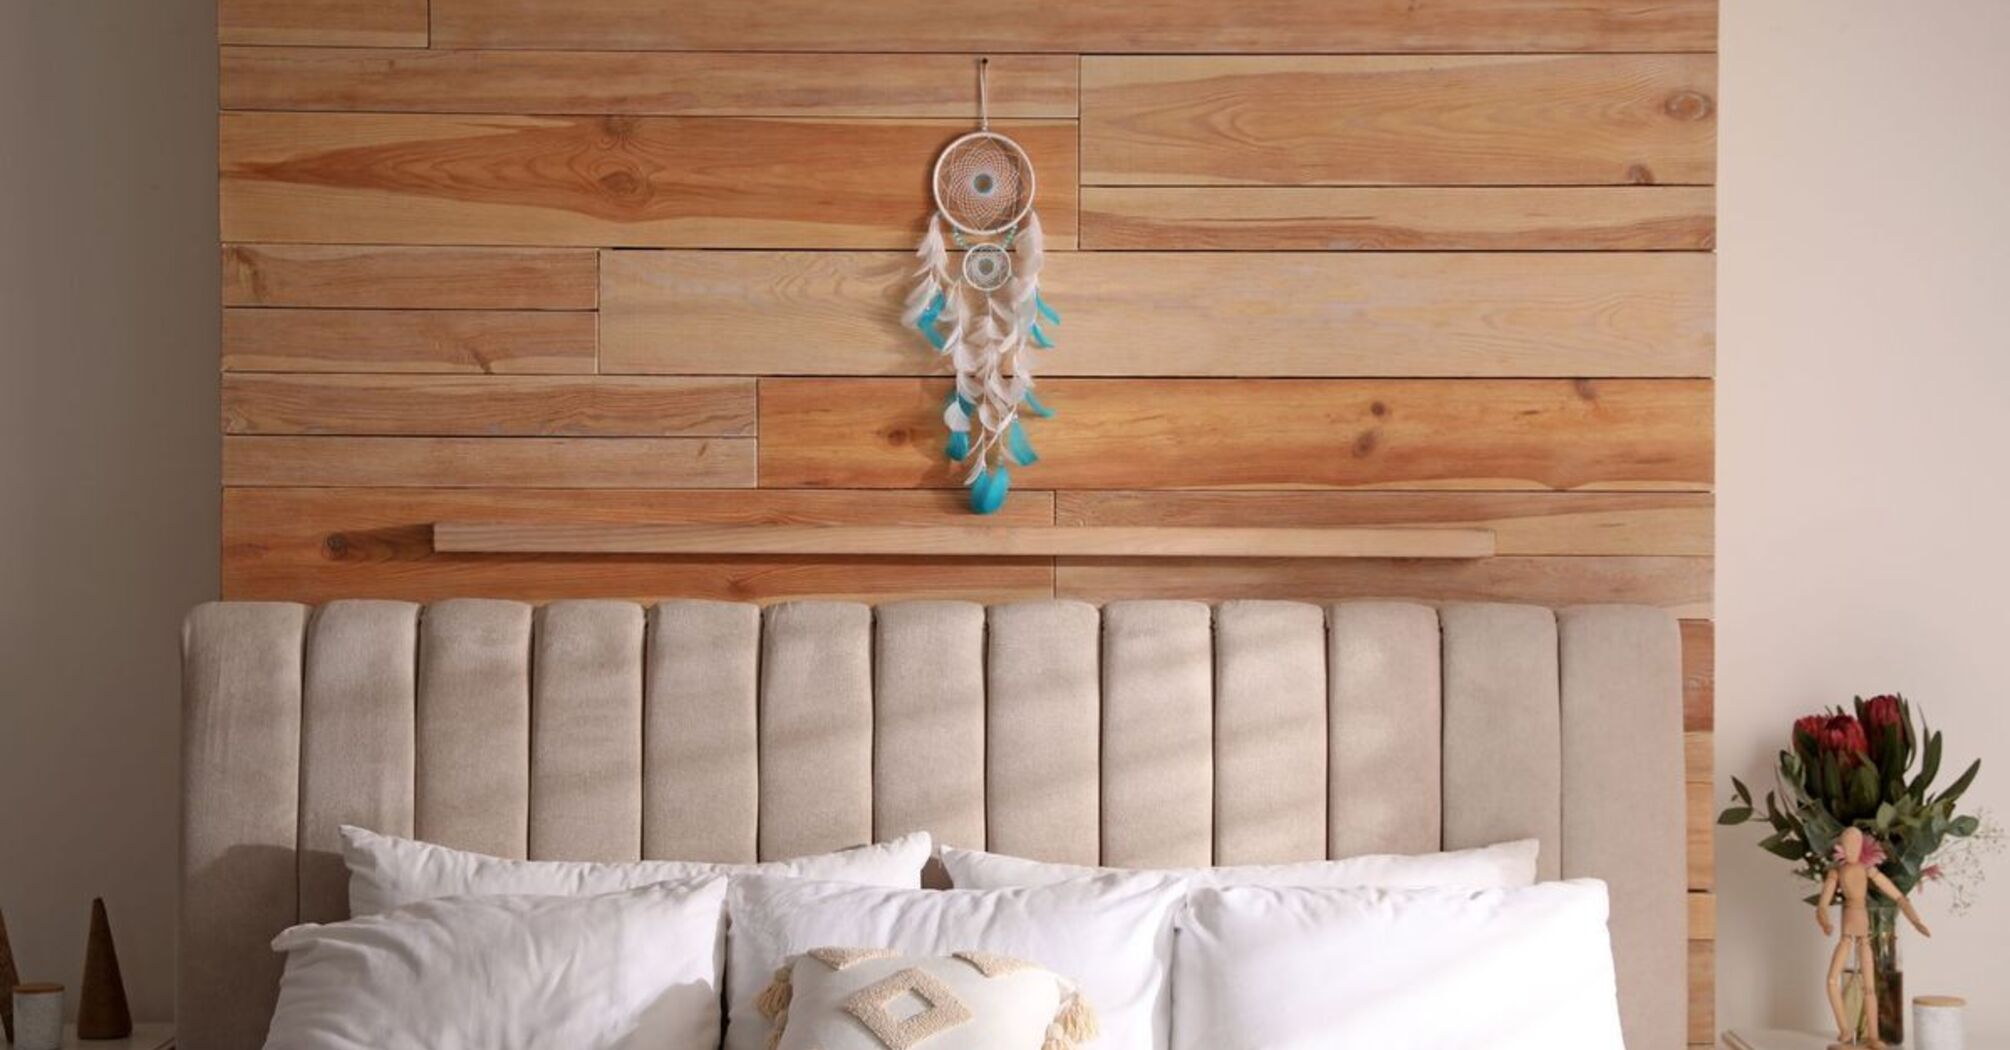 5 reasons why you should hang a dream catcher in your room